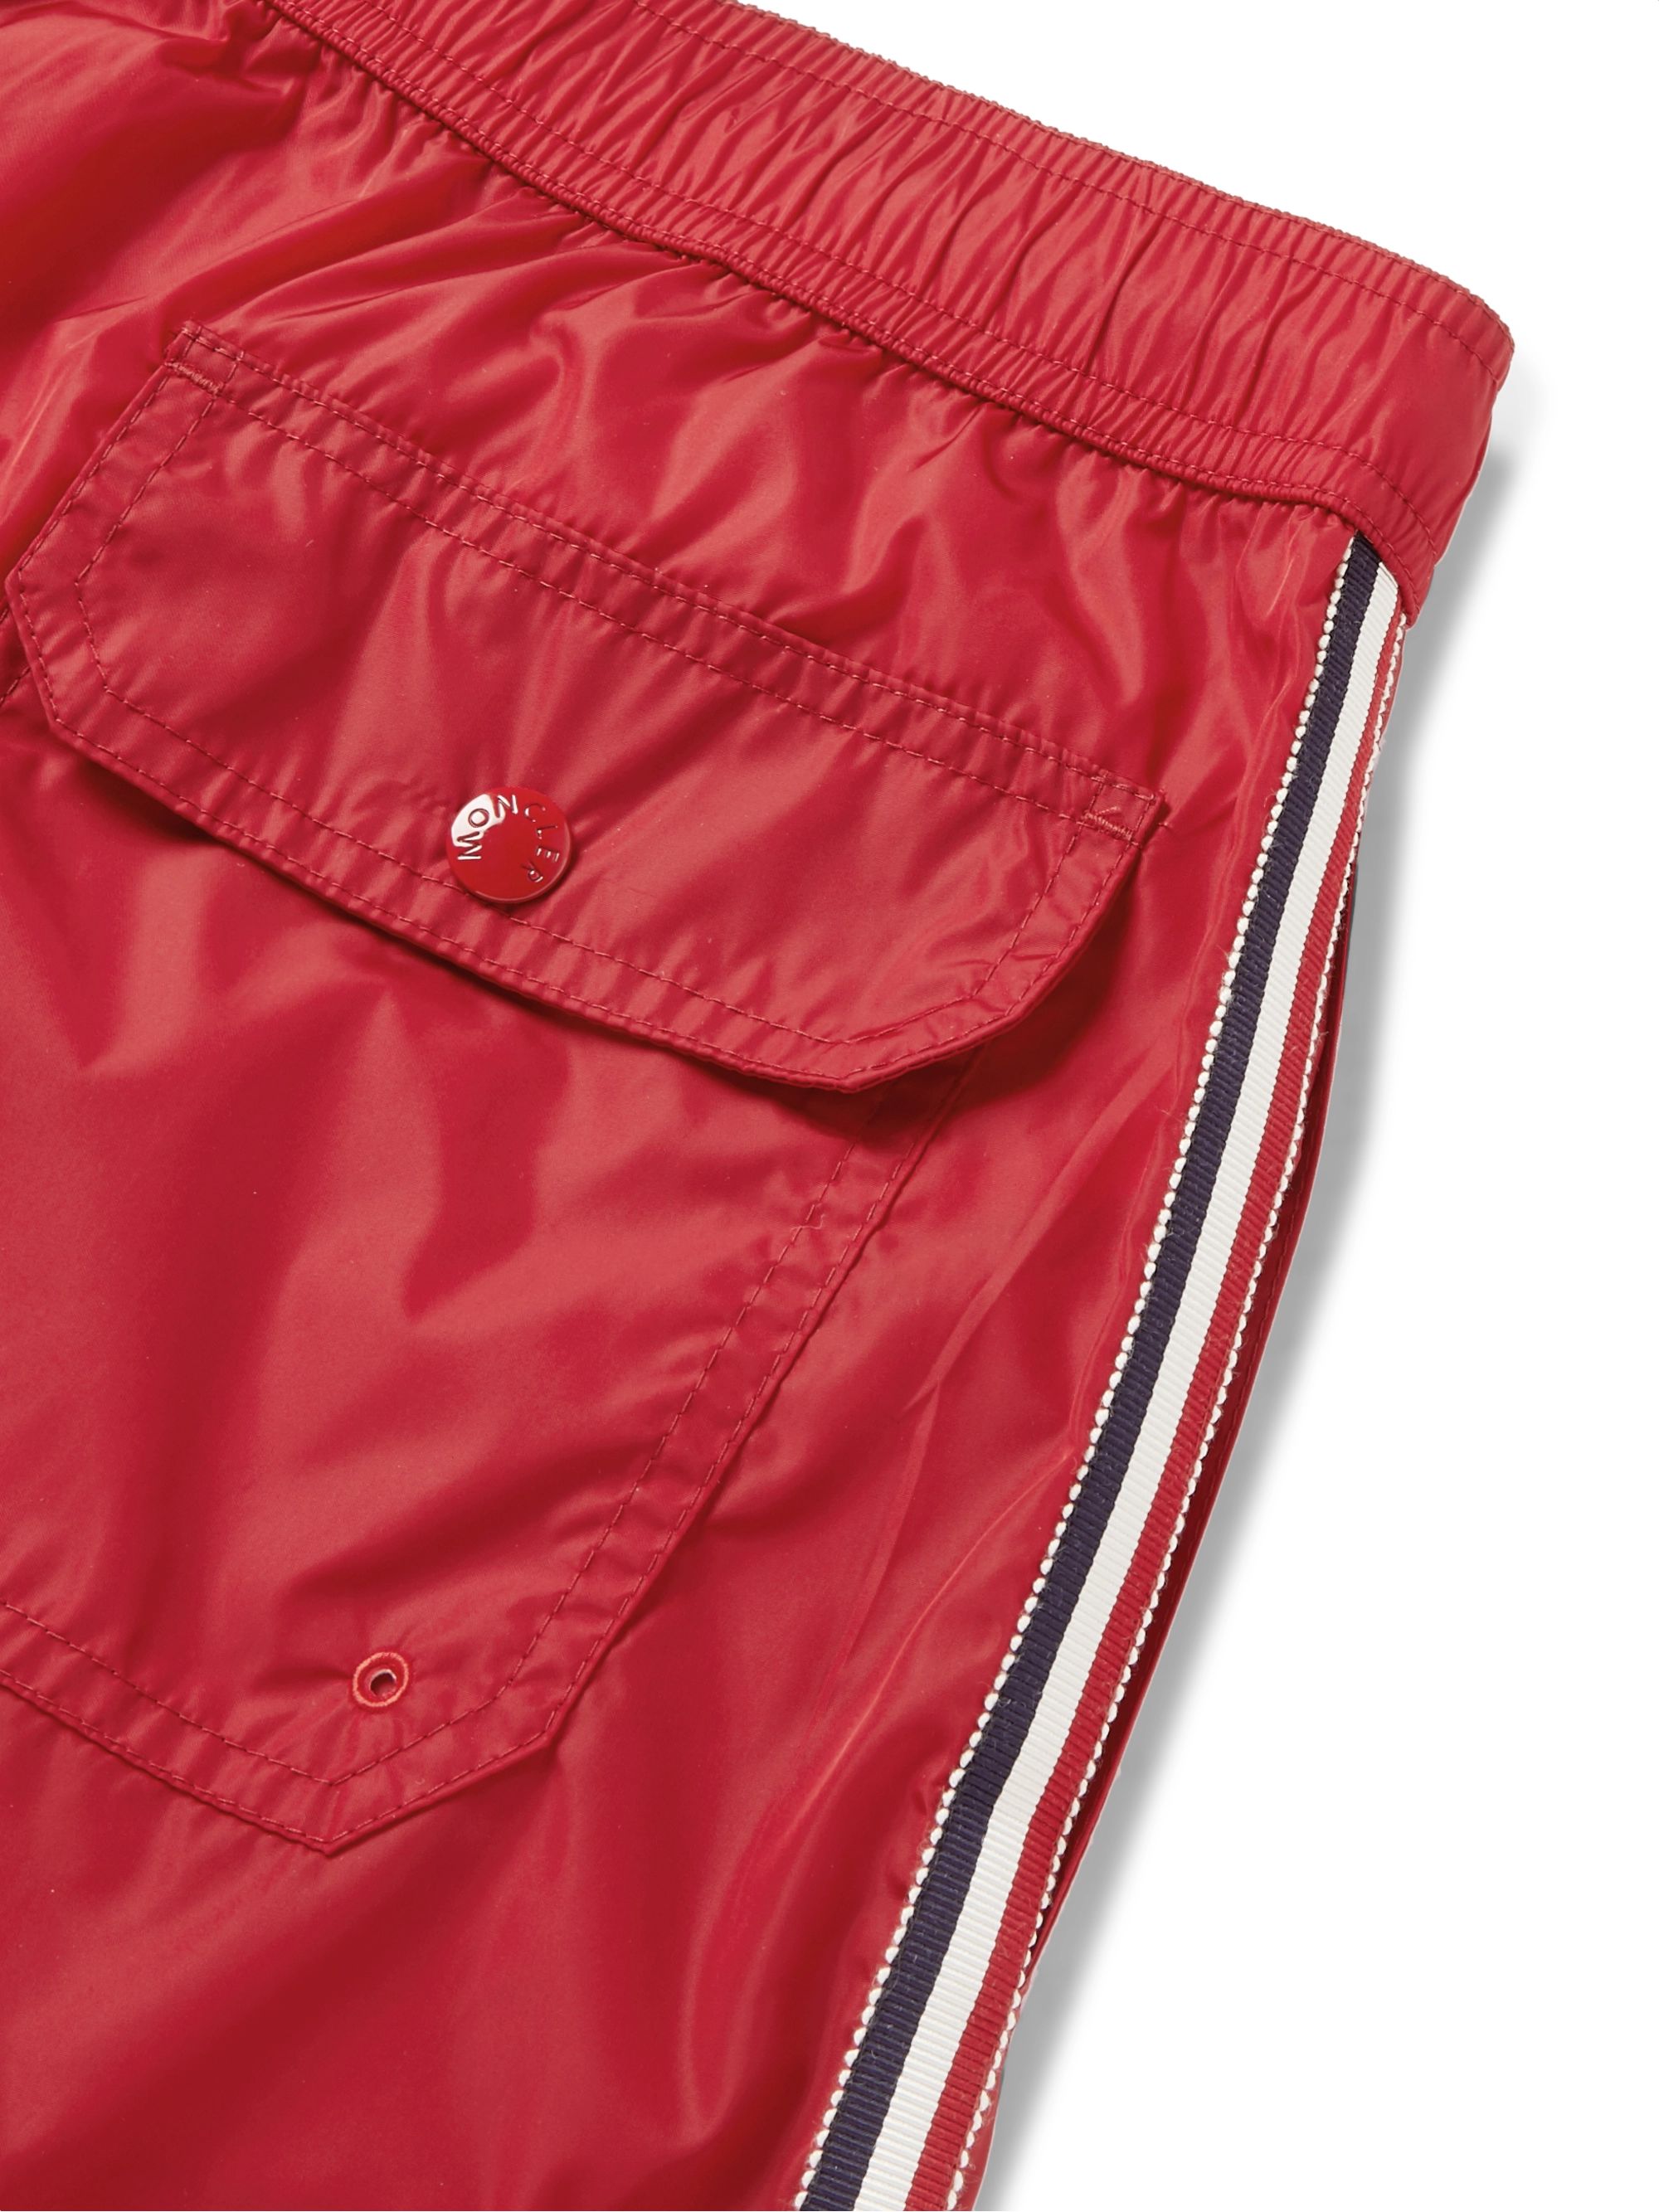 red moncler shorts